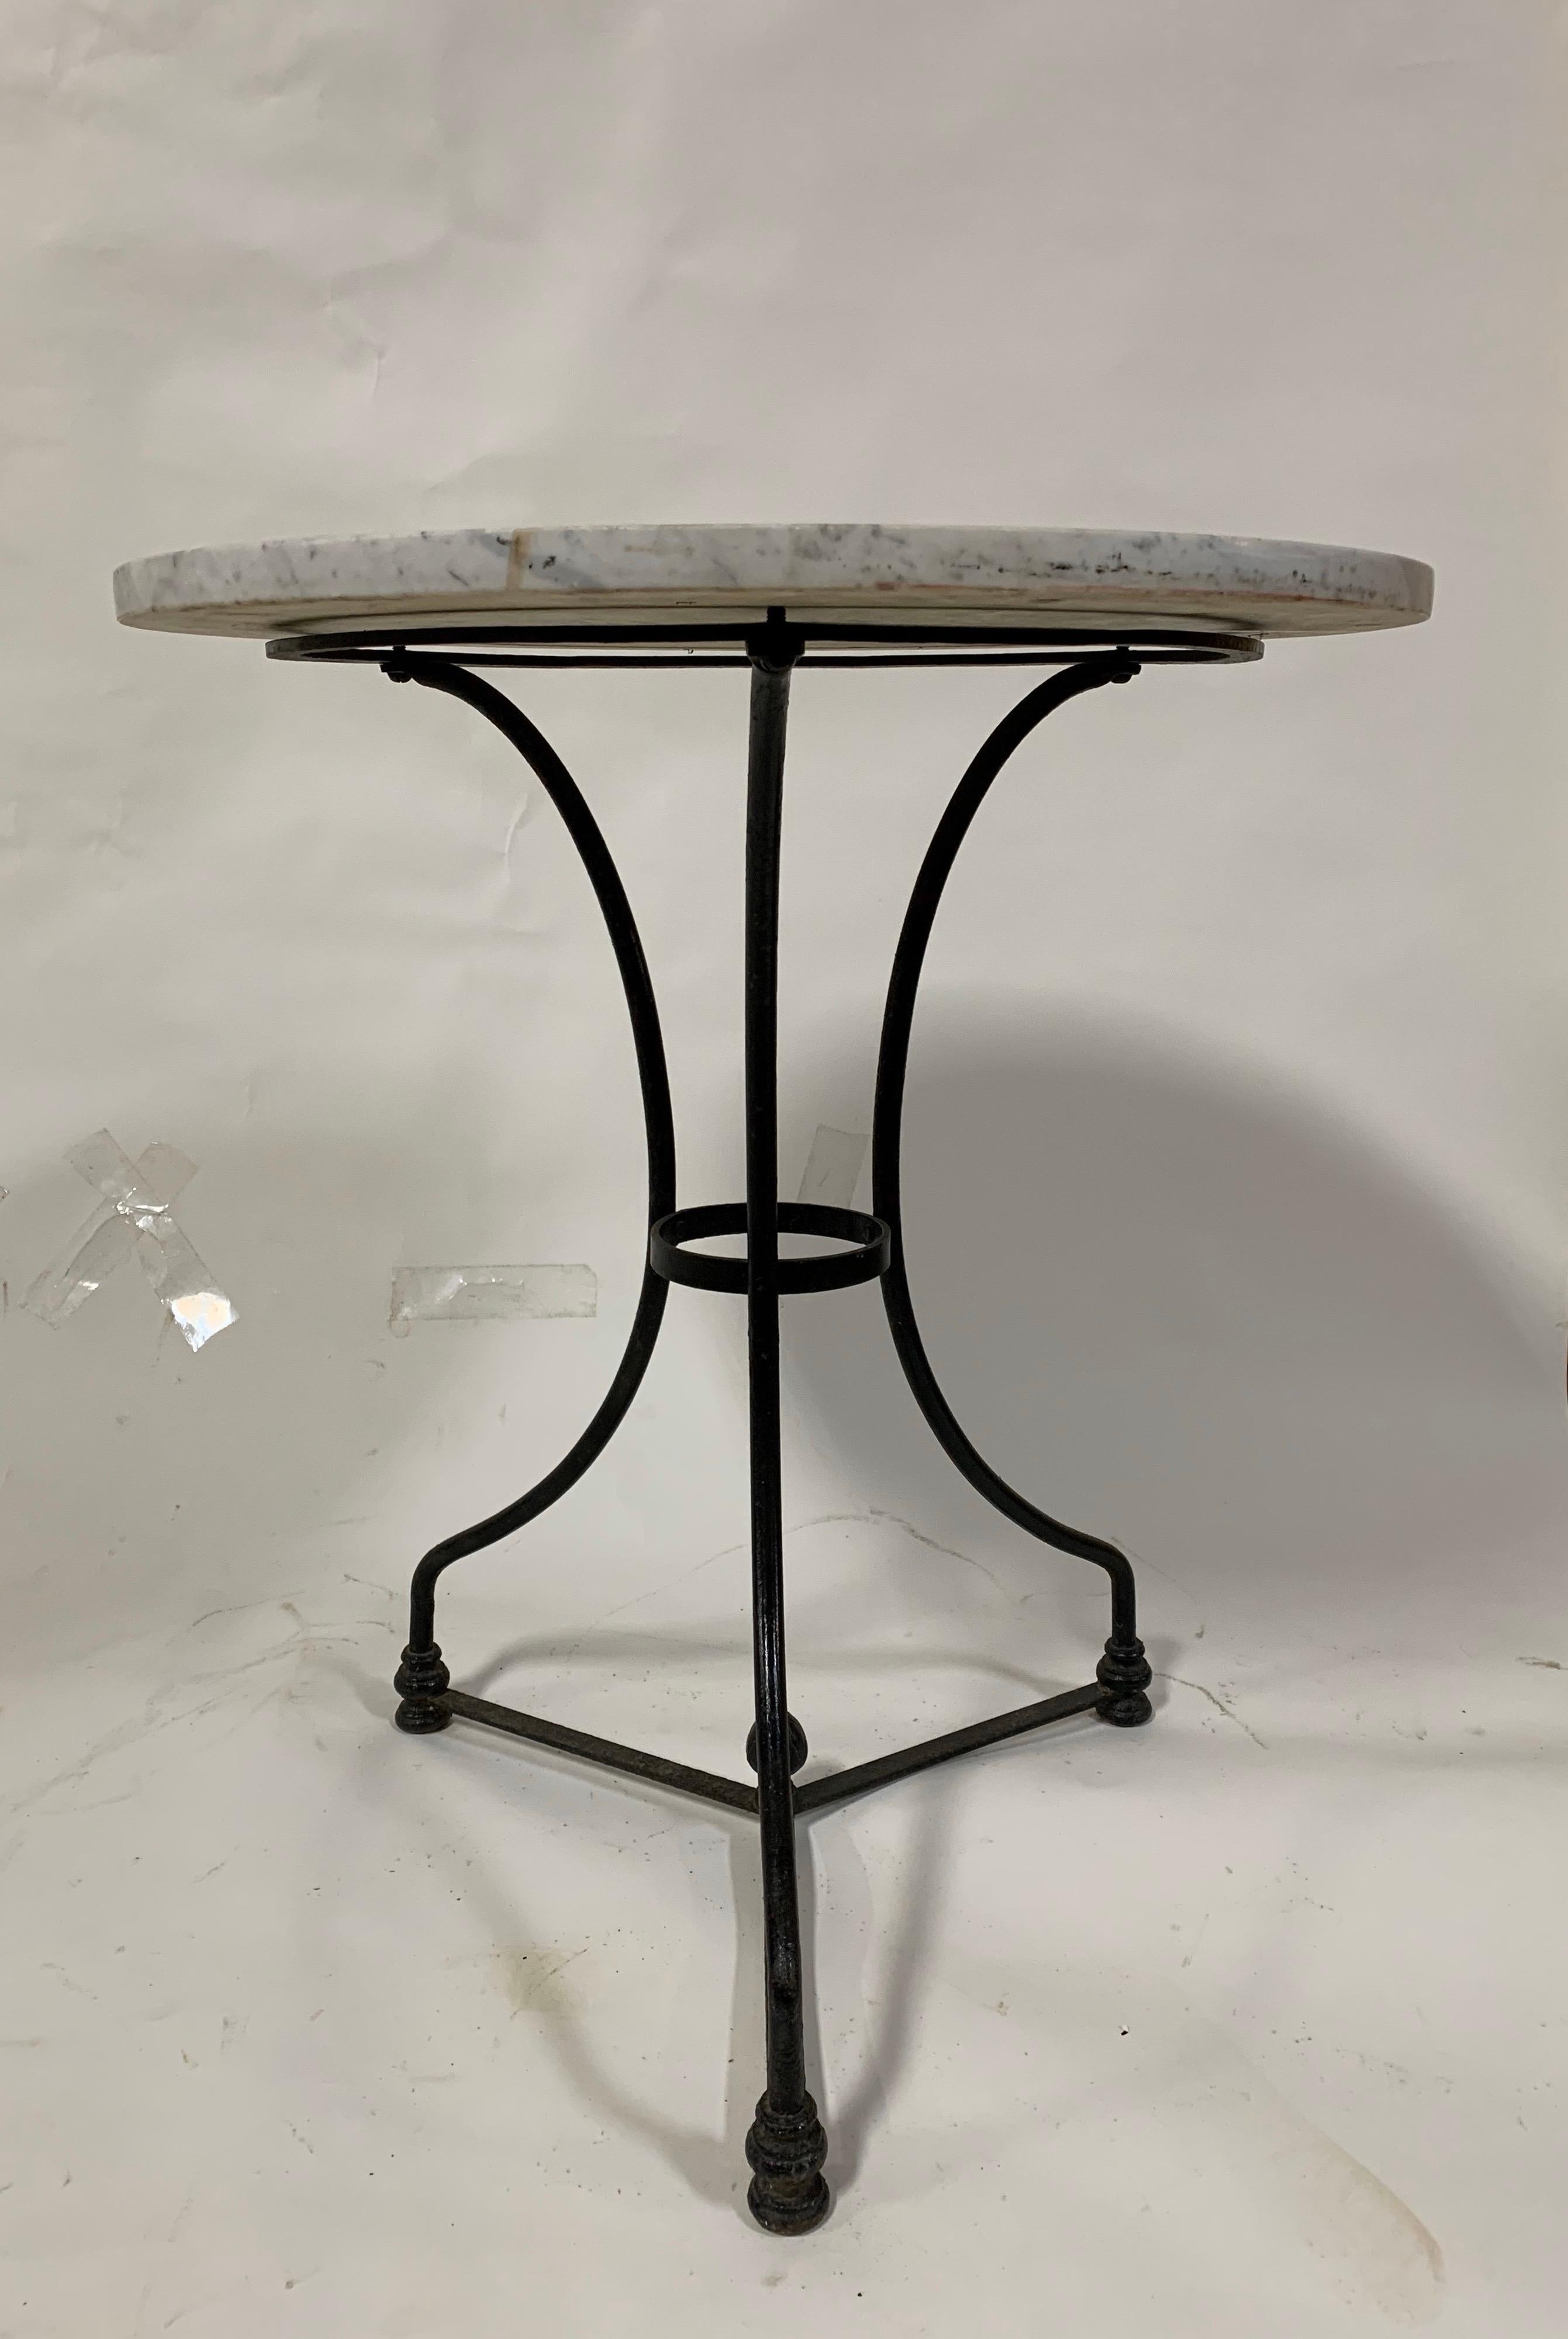 Vintage Ralph Lauren French cafe table
$750


A vintage French cafe table with round white marble top and black iron base, circa 1920-1940.

Ideal as a small dining table or side table.

Acquired from the Ralph Lauren Home sale; this item